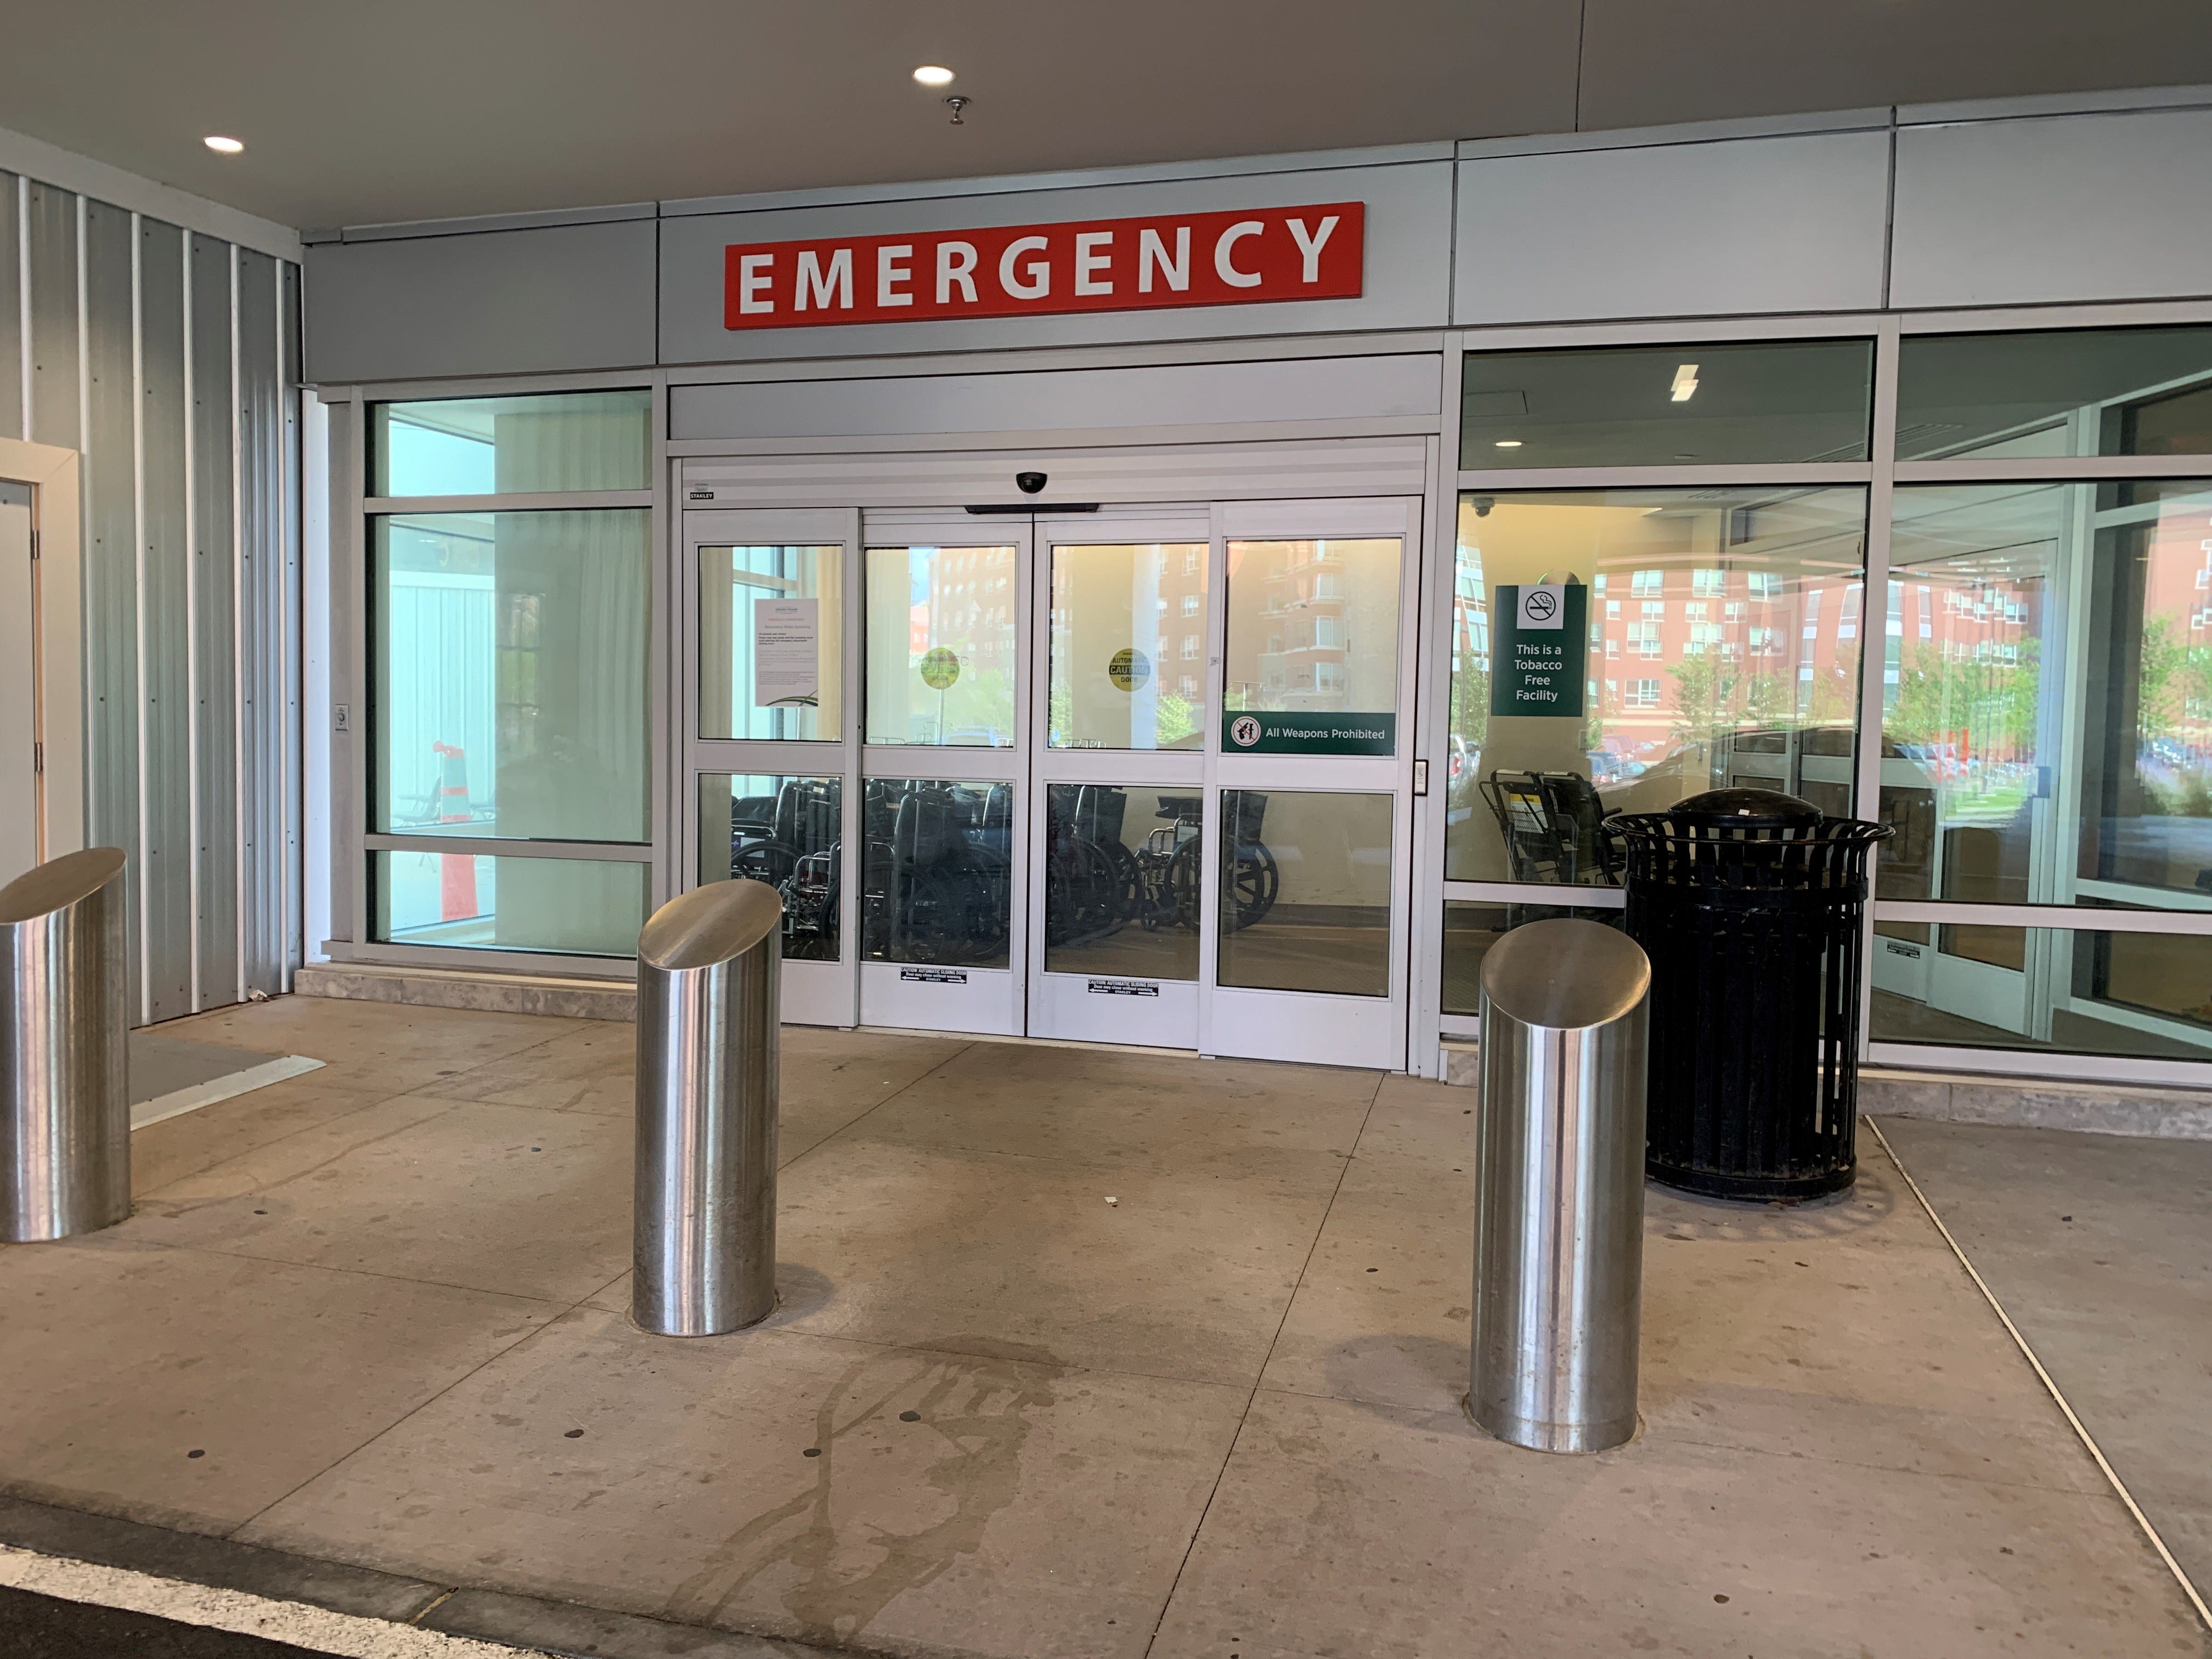 The entrance to the emergency department at the University of Vermont Medical Center in Burlington.